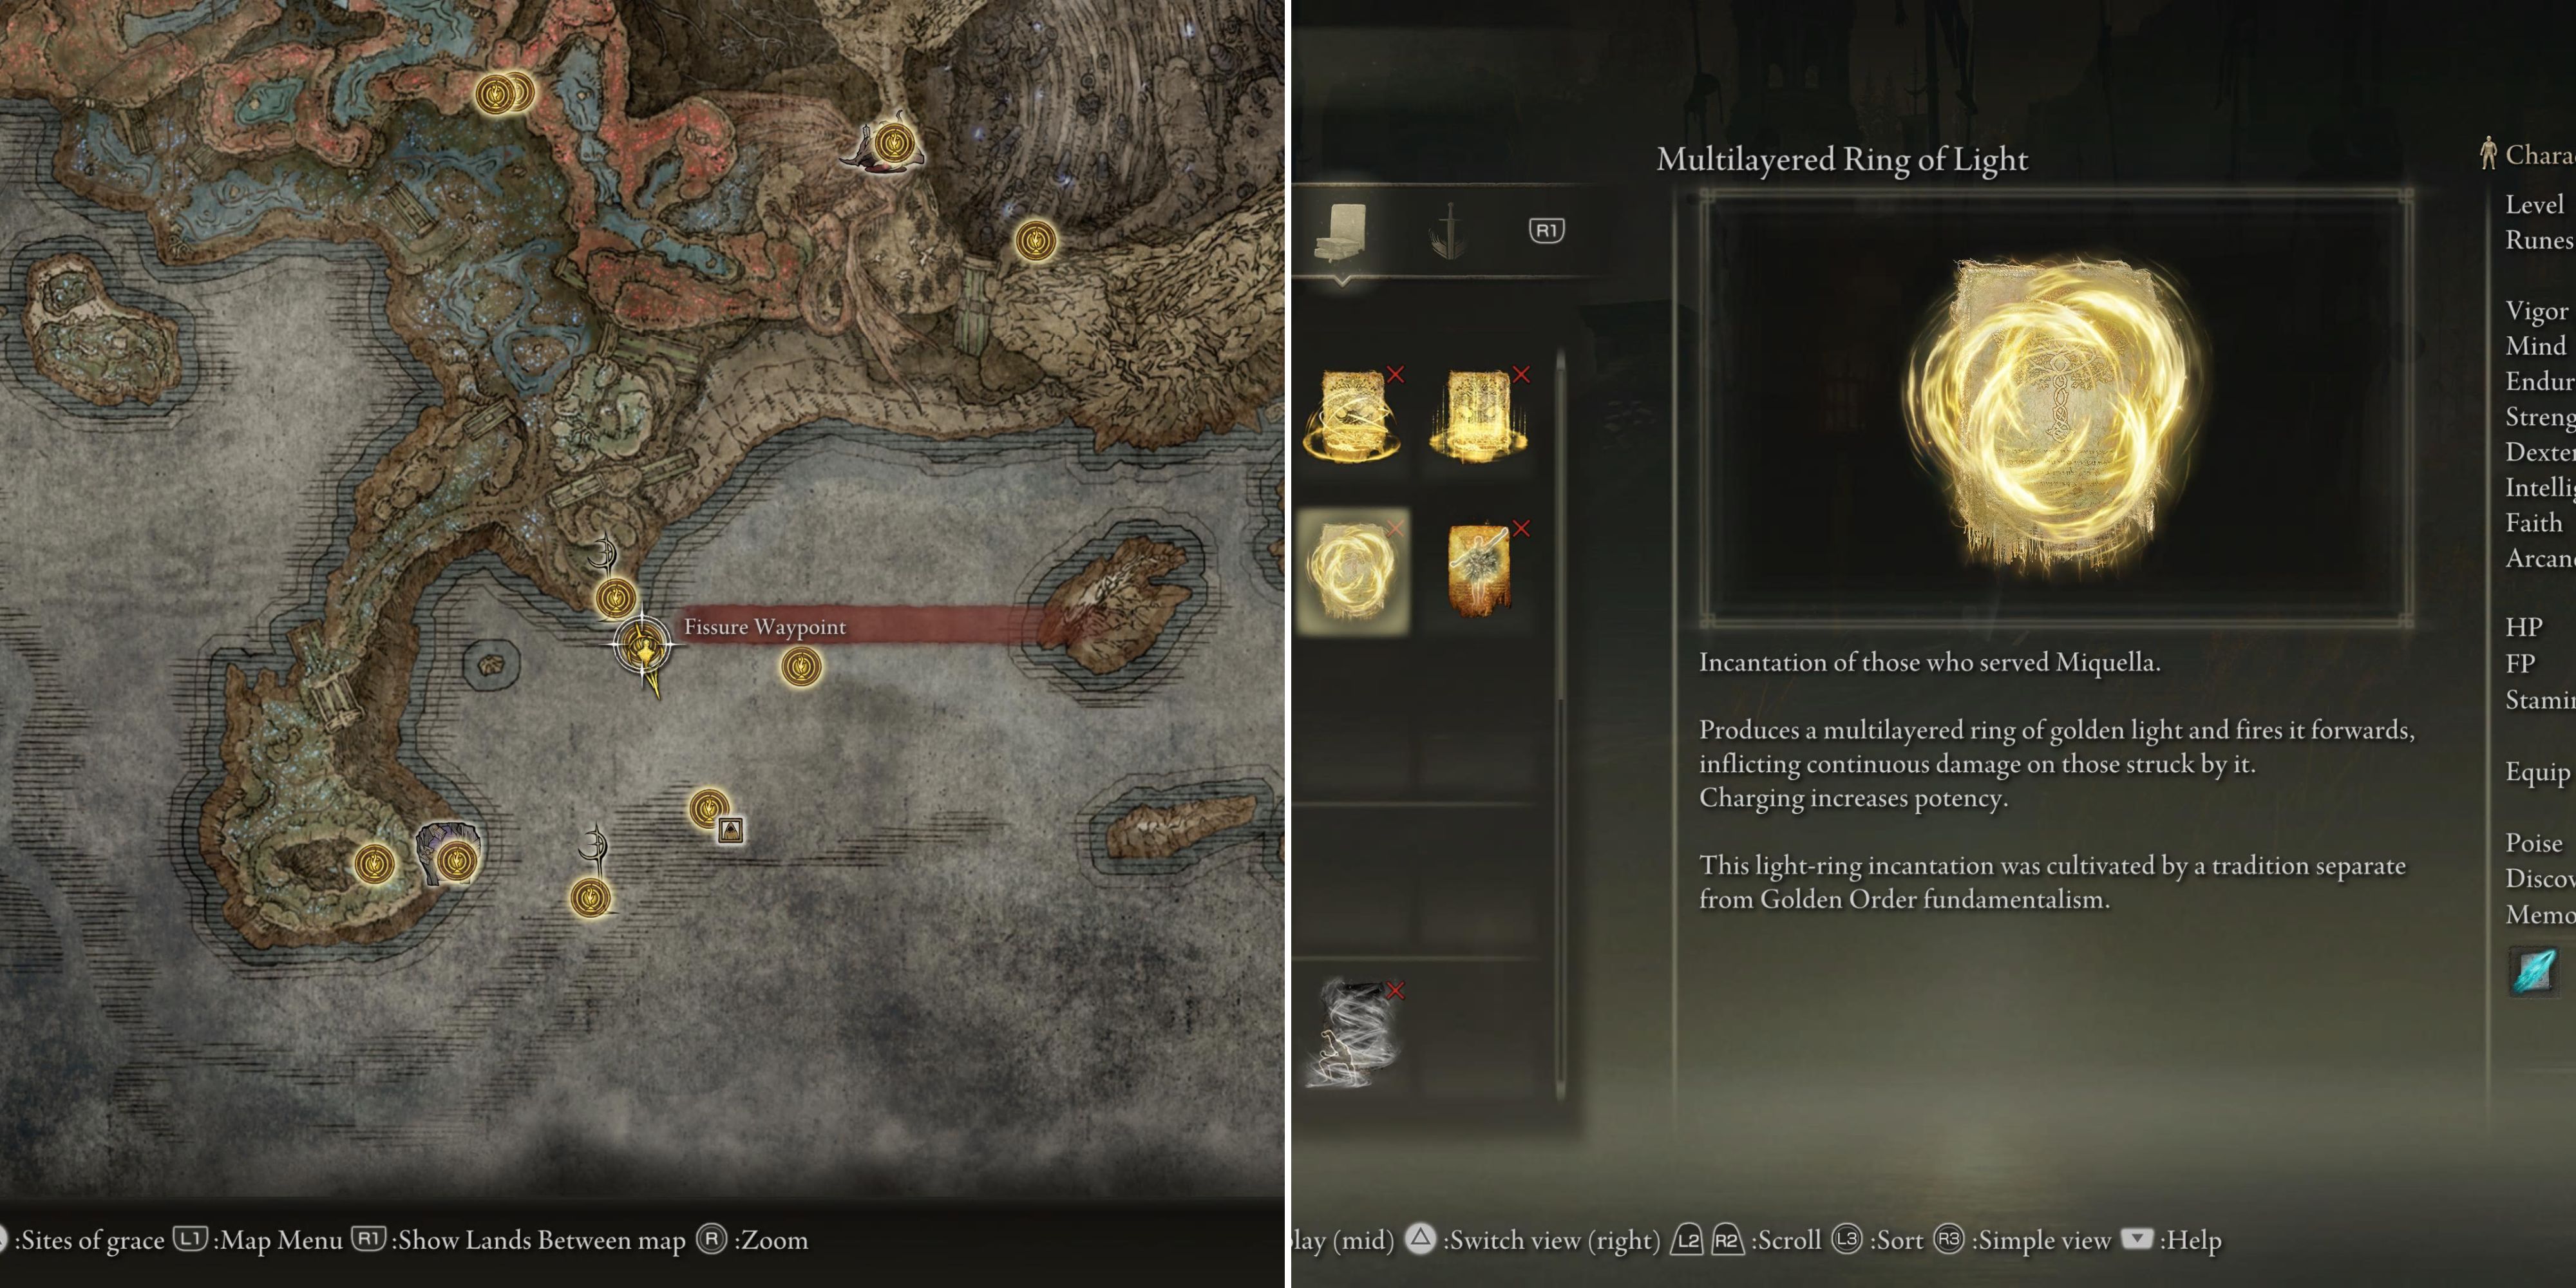 The Fissure Waypoint Location On The Map & The Multilayered RIng Of Light In The Inventory 